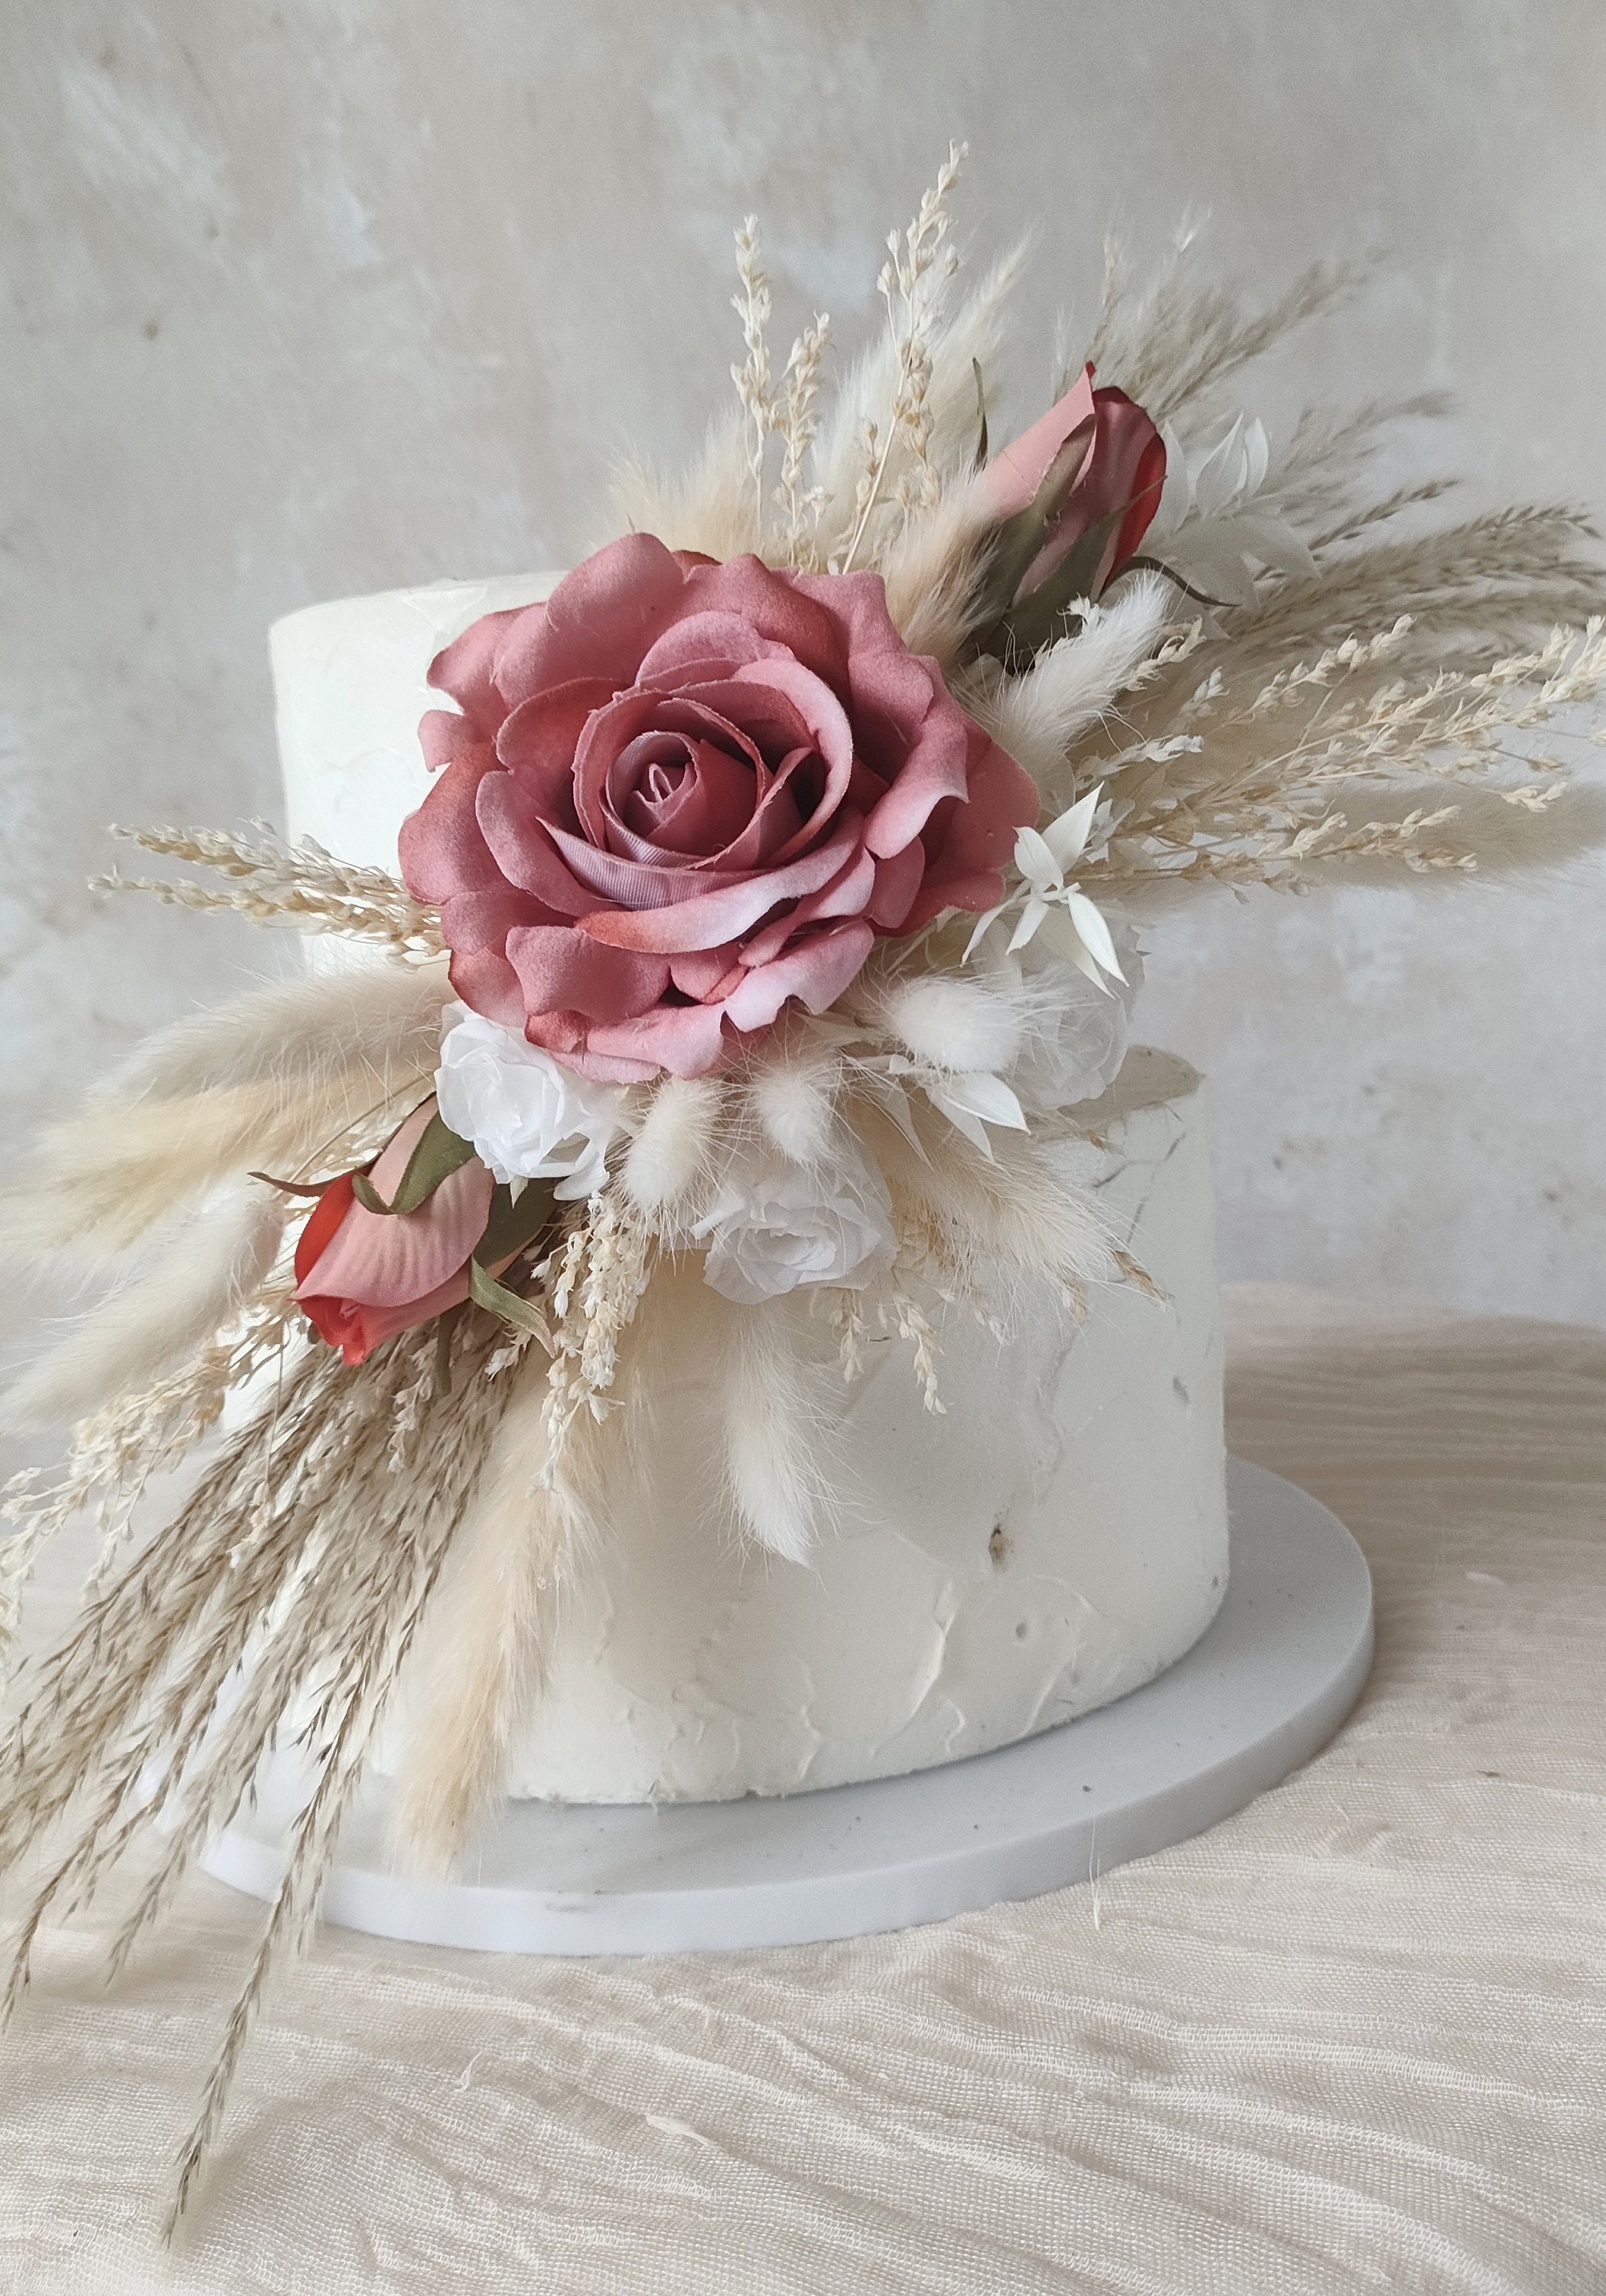 4' Rustic Pink and Gold Pampas Grass and Dried Flower Cake Topper Wreath  Hoop UK Wedding Oh Baby Cake Topper 